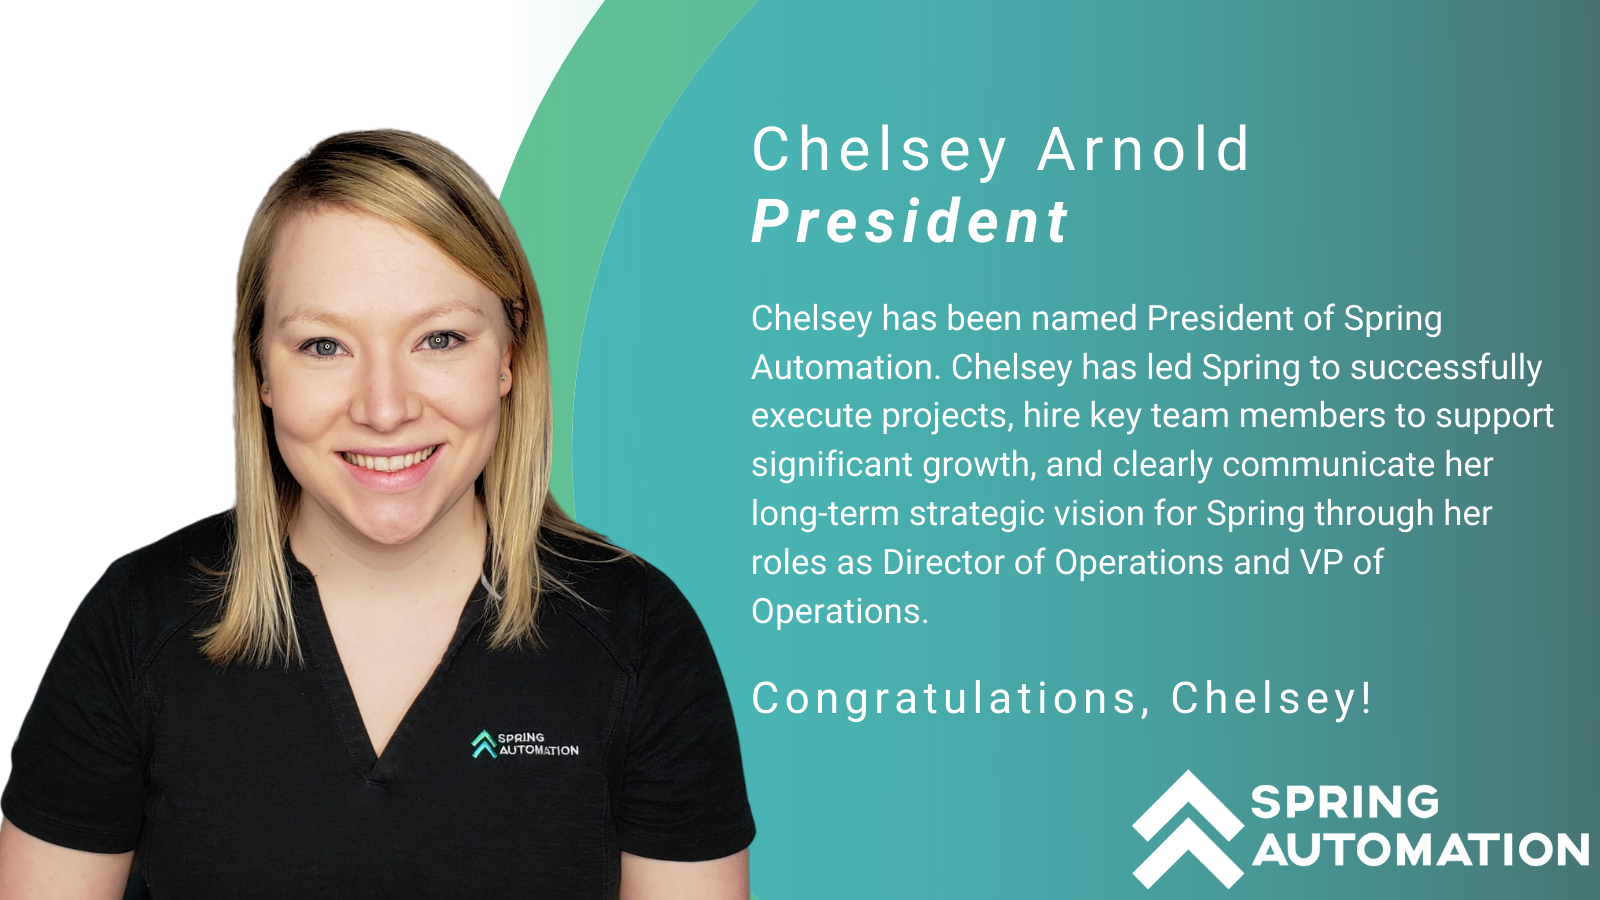 Chelsey Arnold Promoted to President of Spring Automation